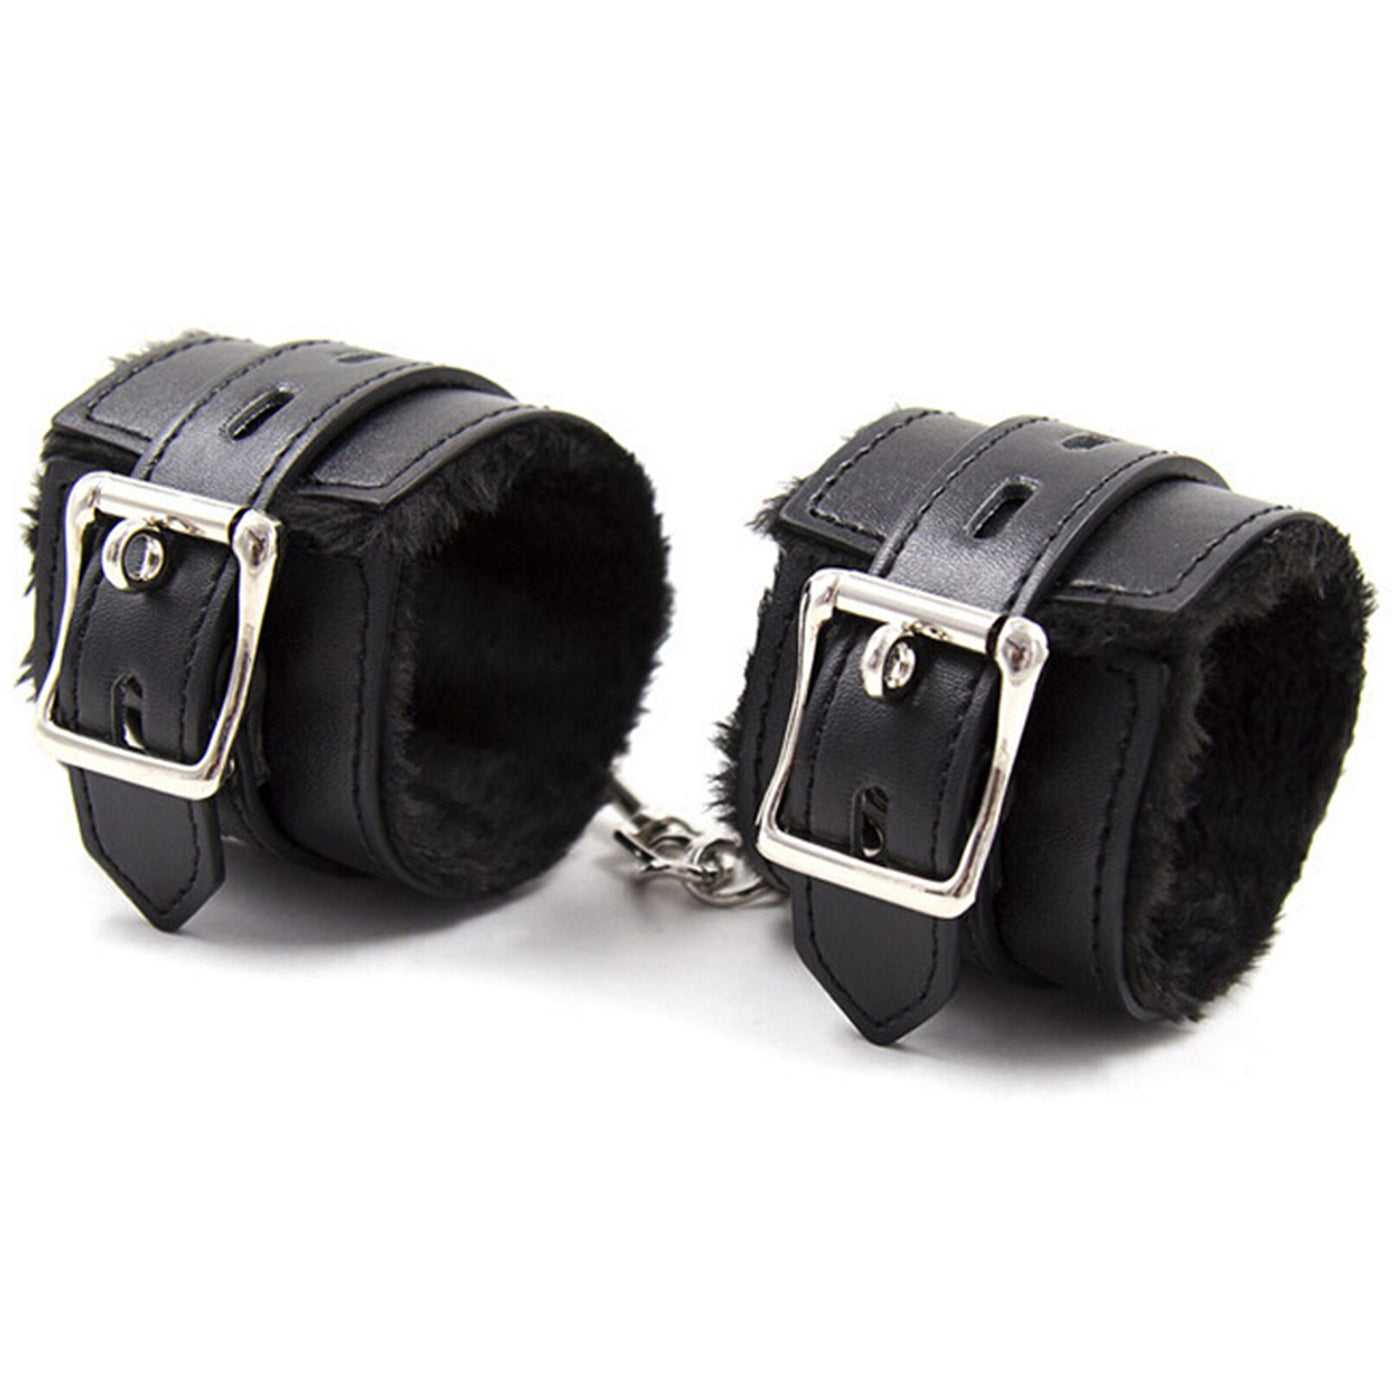 Handcuffs with fur